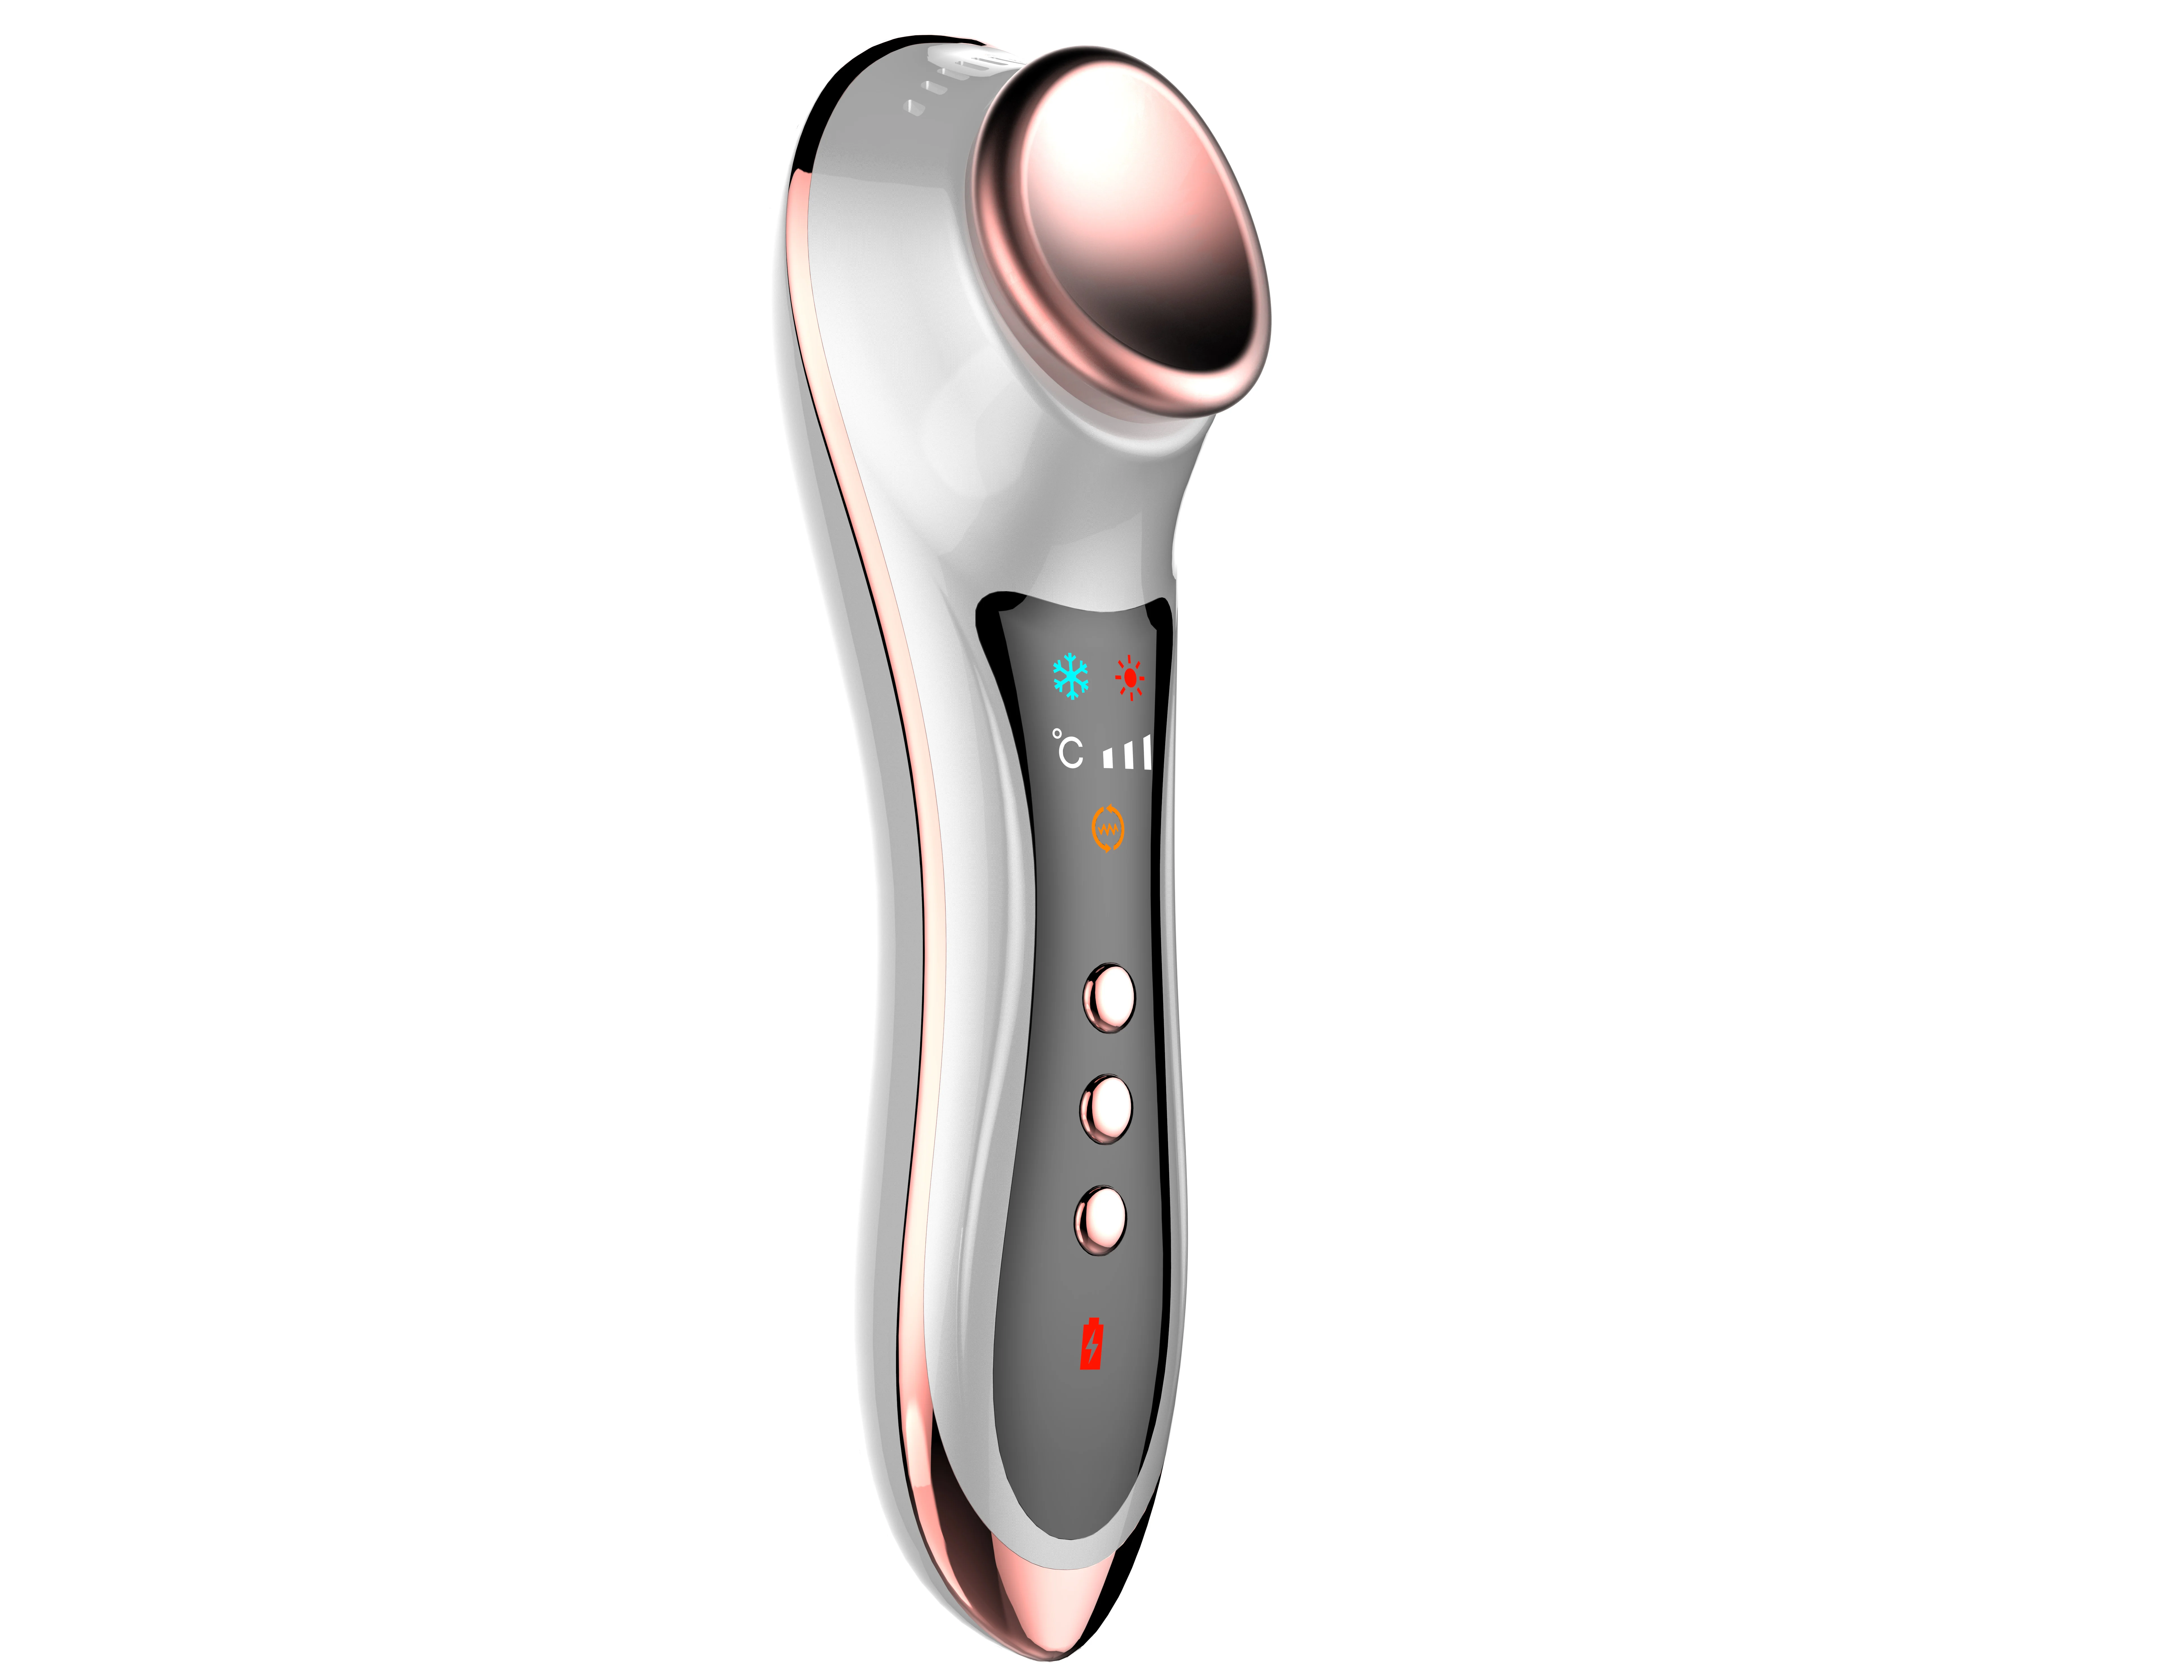 

Skincare options ultrasound massage hot cold face machine new product ideas beauty instrument